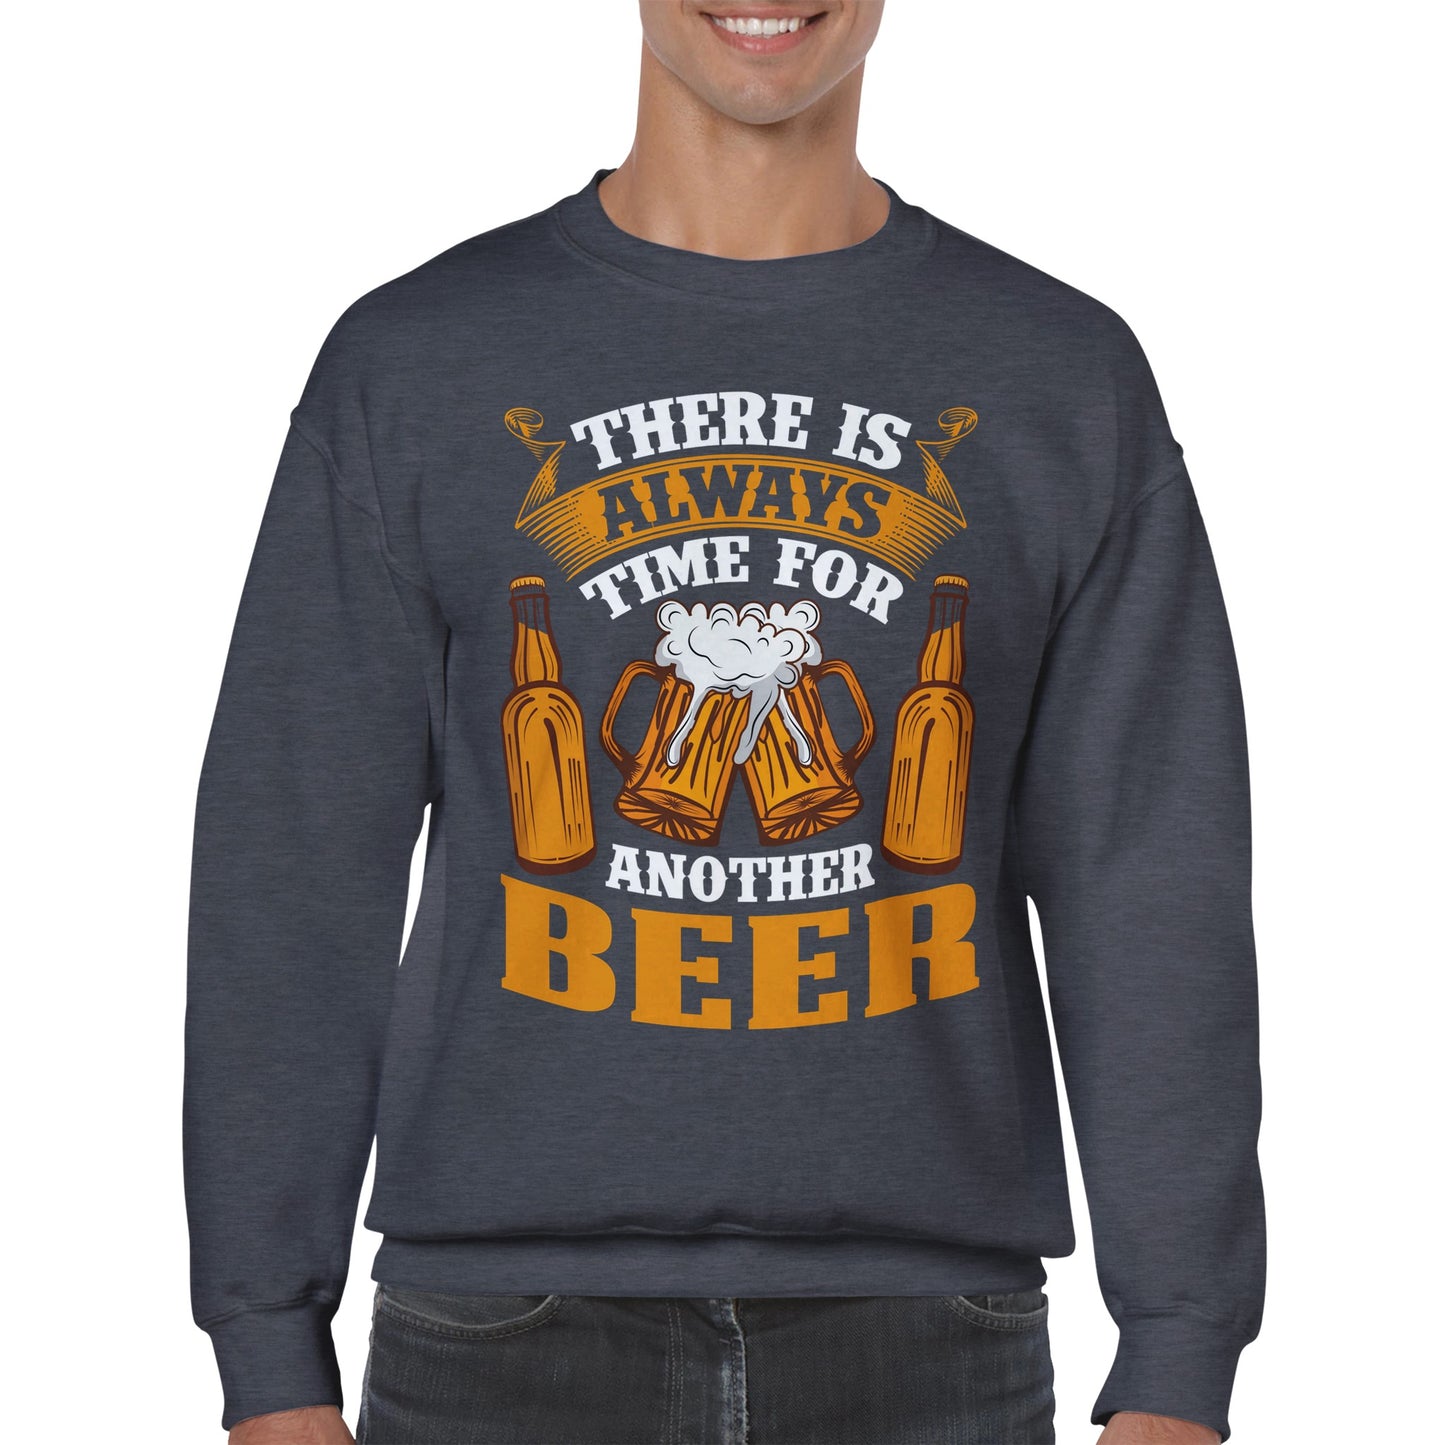 "There's always time for beer" sweater